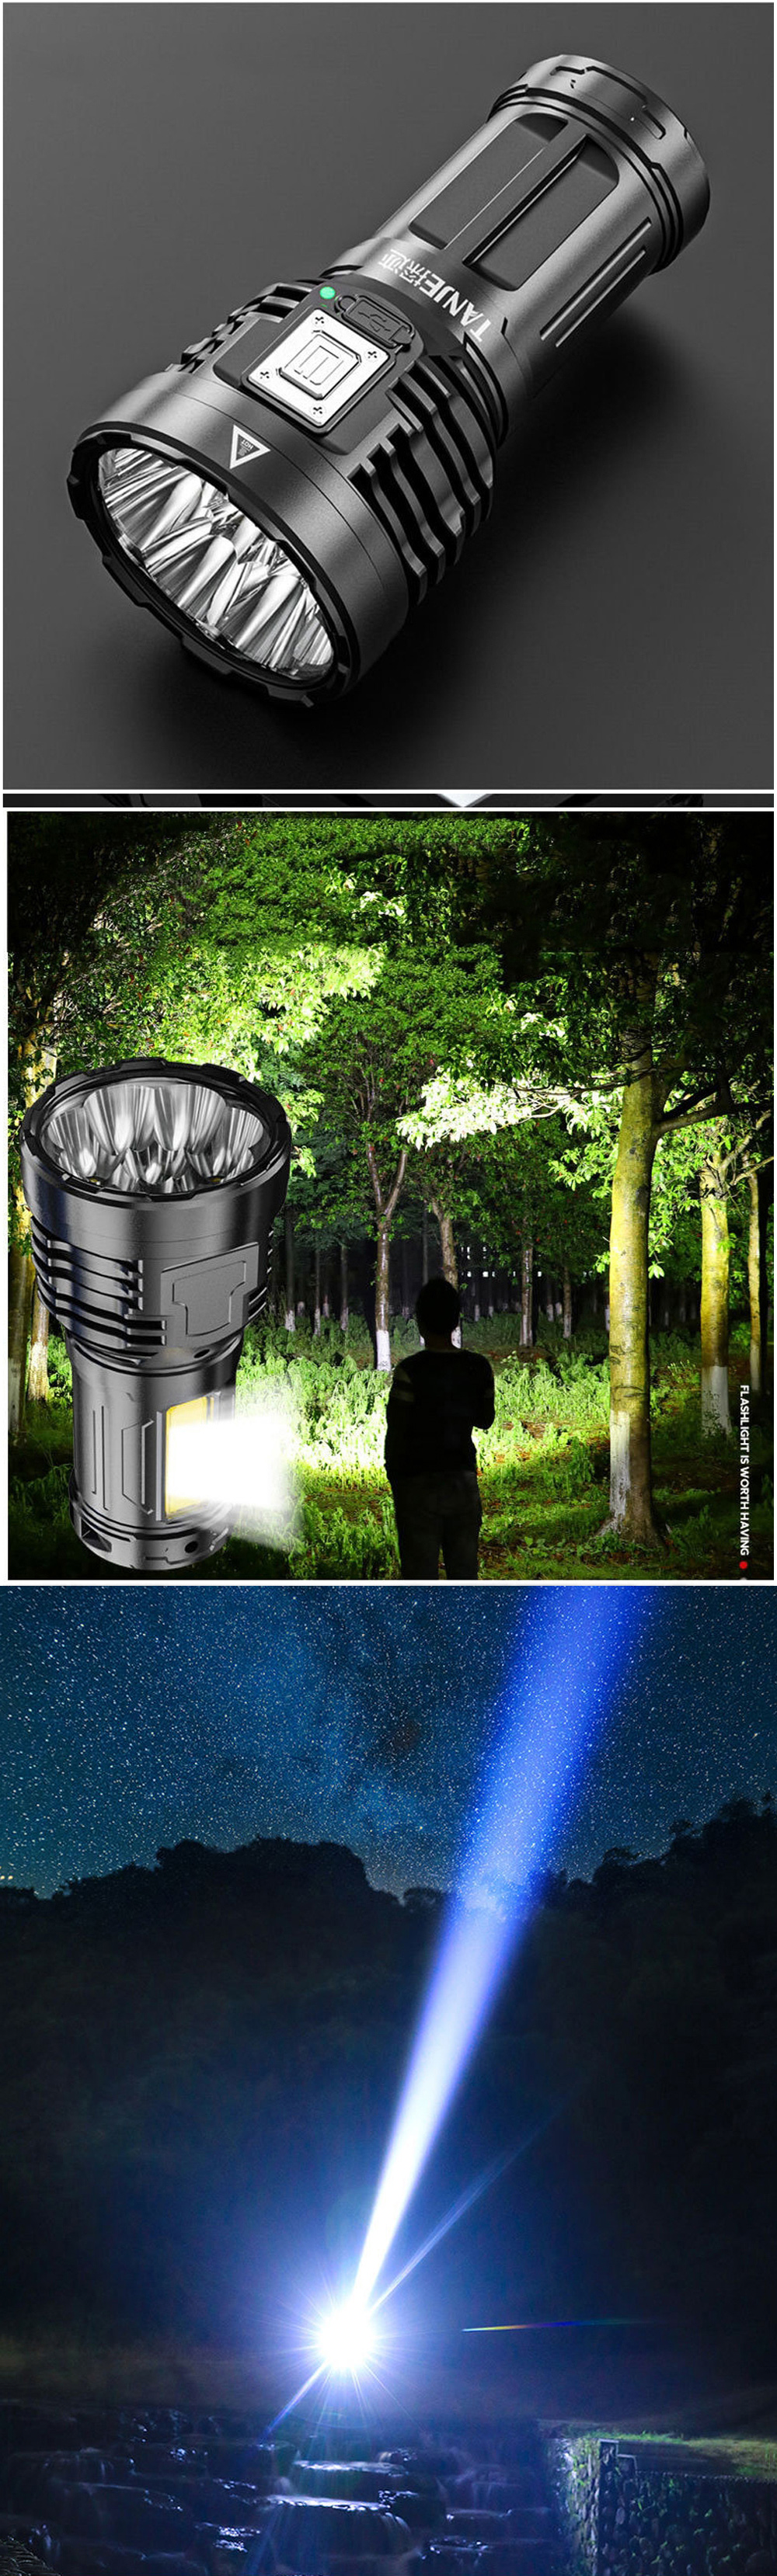 TANJE 8*P900+COB Super Bright Type-C Rechargeable ABS Housing Flashlight with 18650 Battery COB Side Light 500m Long Range Powerful LED Torch Camping Lantern